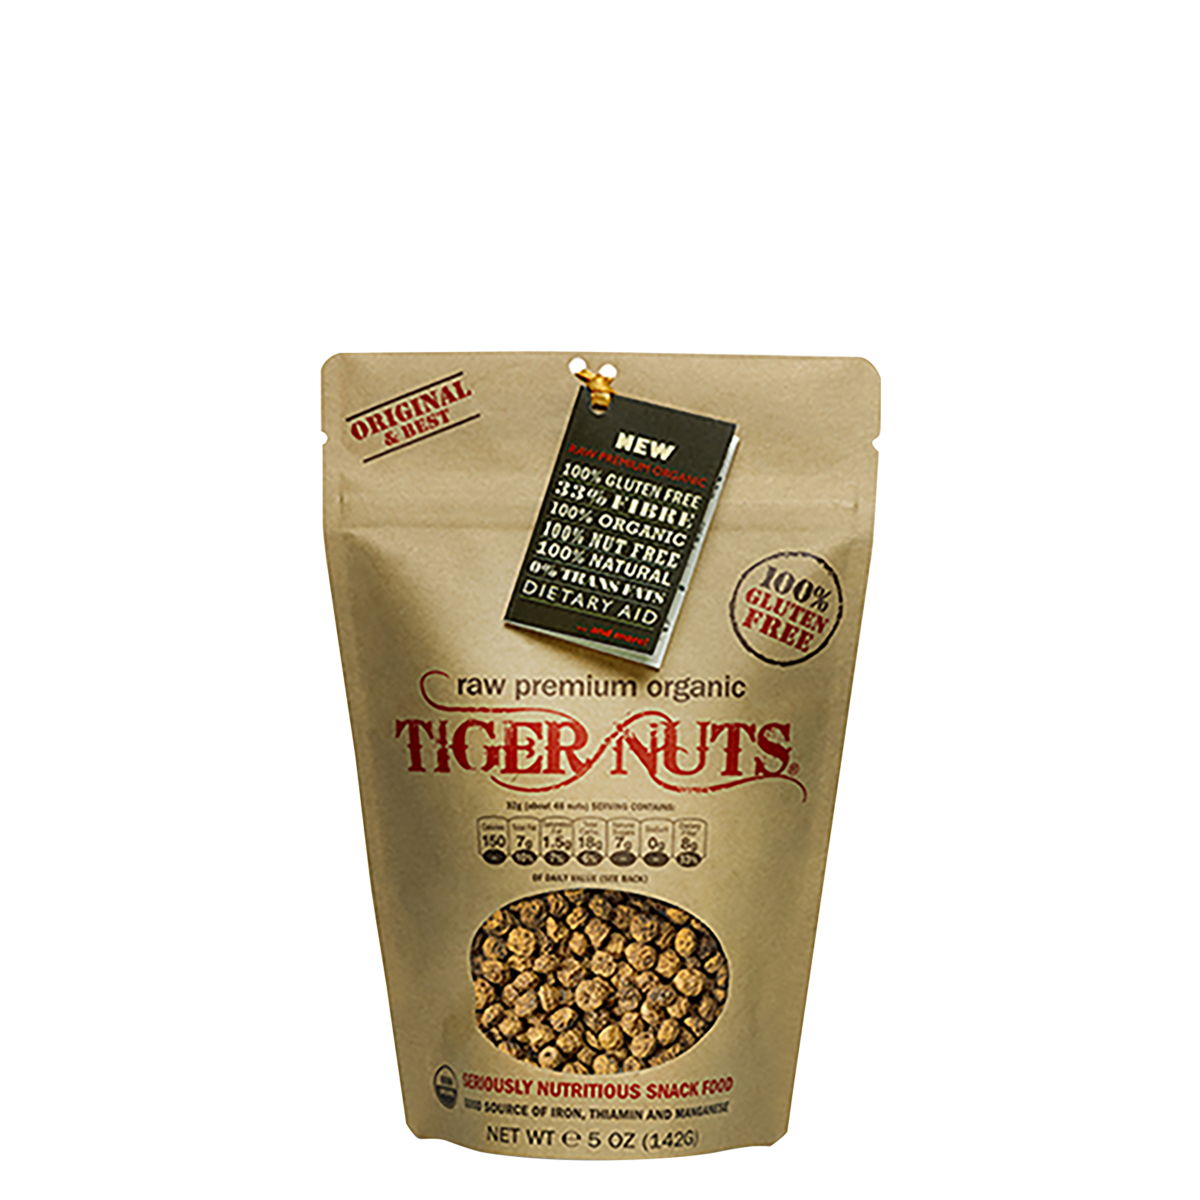 Tiger Nuts Raw Premium Organic Tiger Nuts in 5 oz bags - 24 bags by Farm2Me